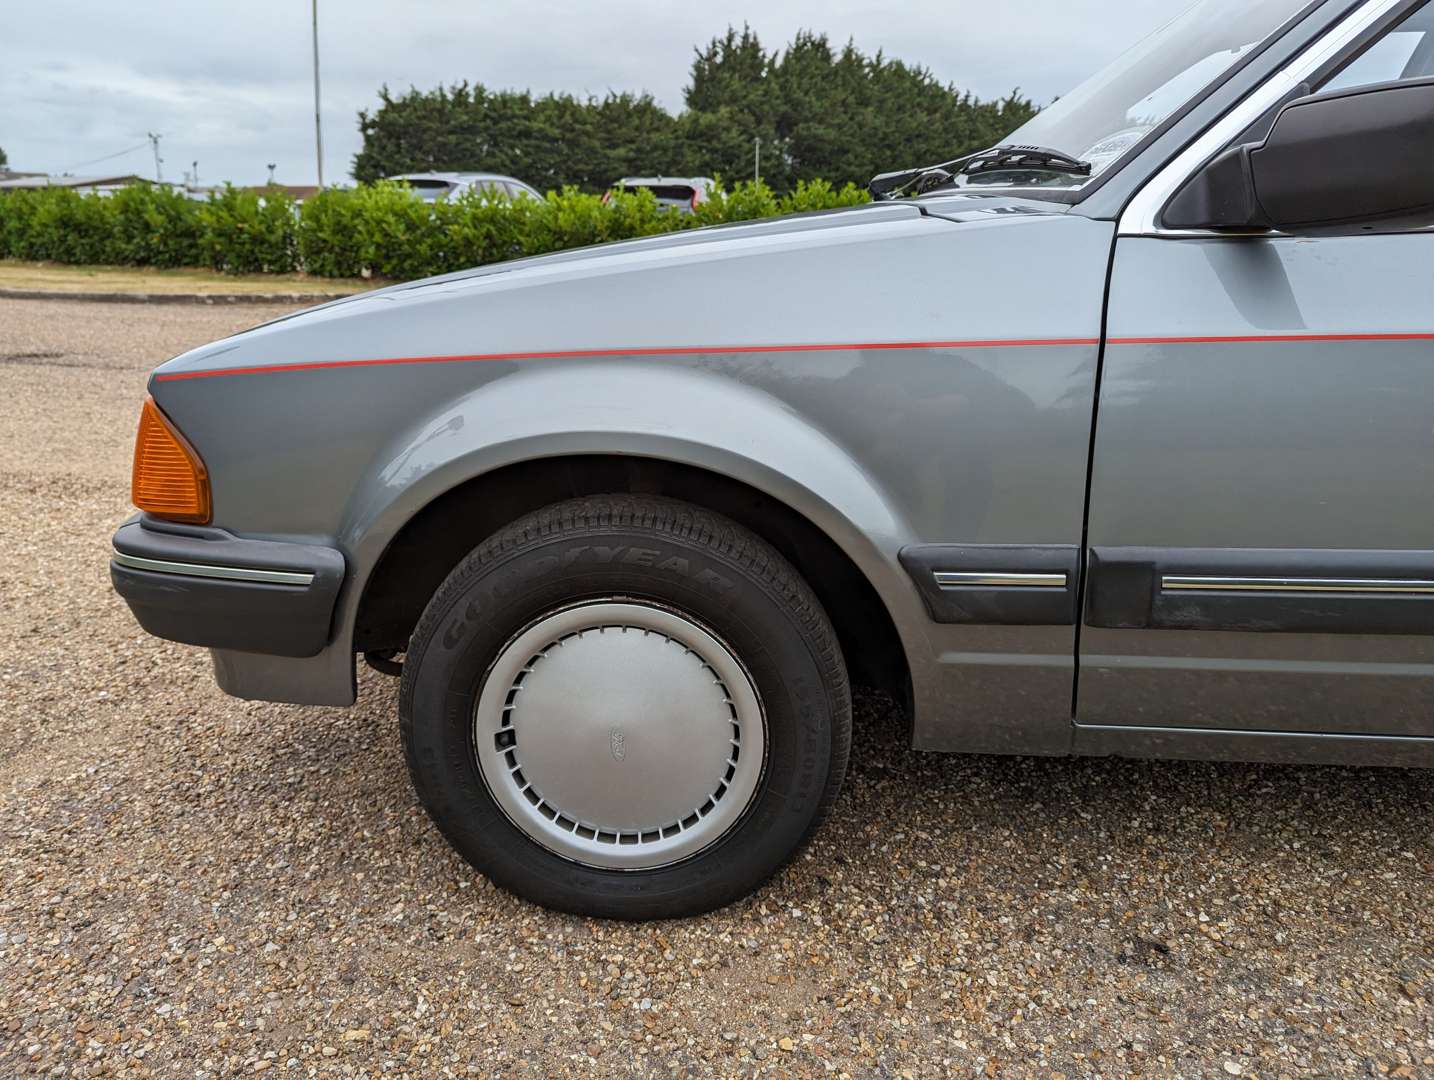 <p>1985 FORD ORION 1.6D GL</p>